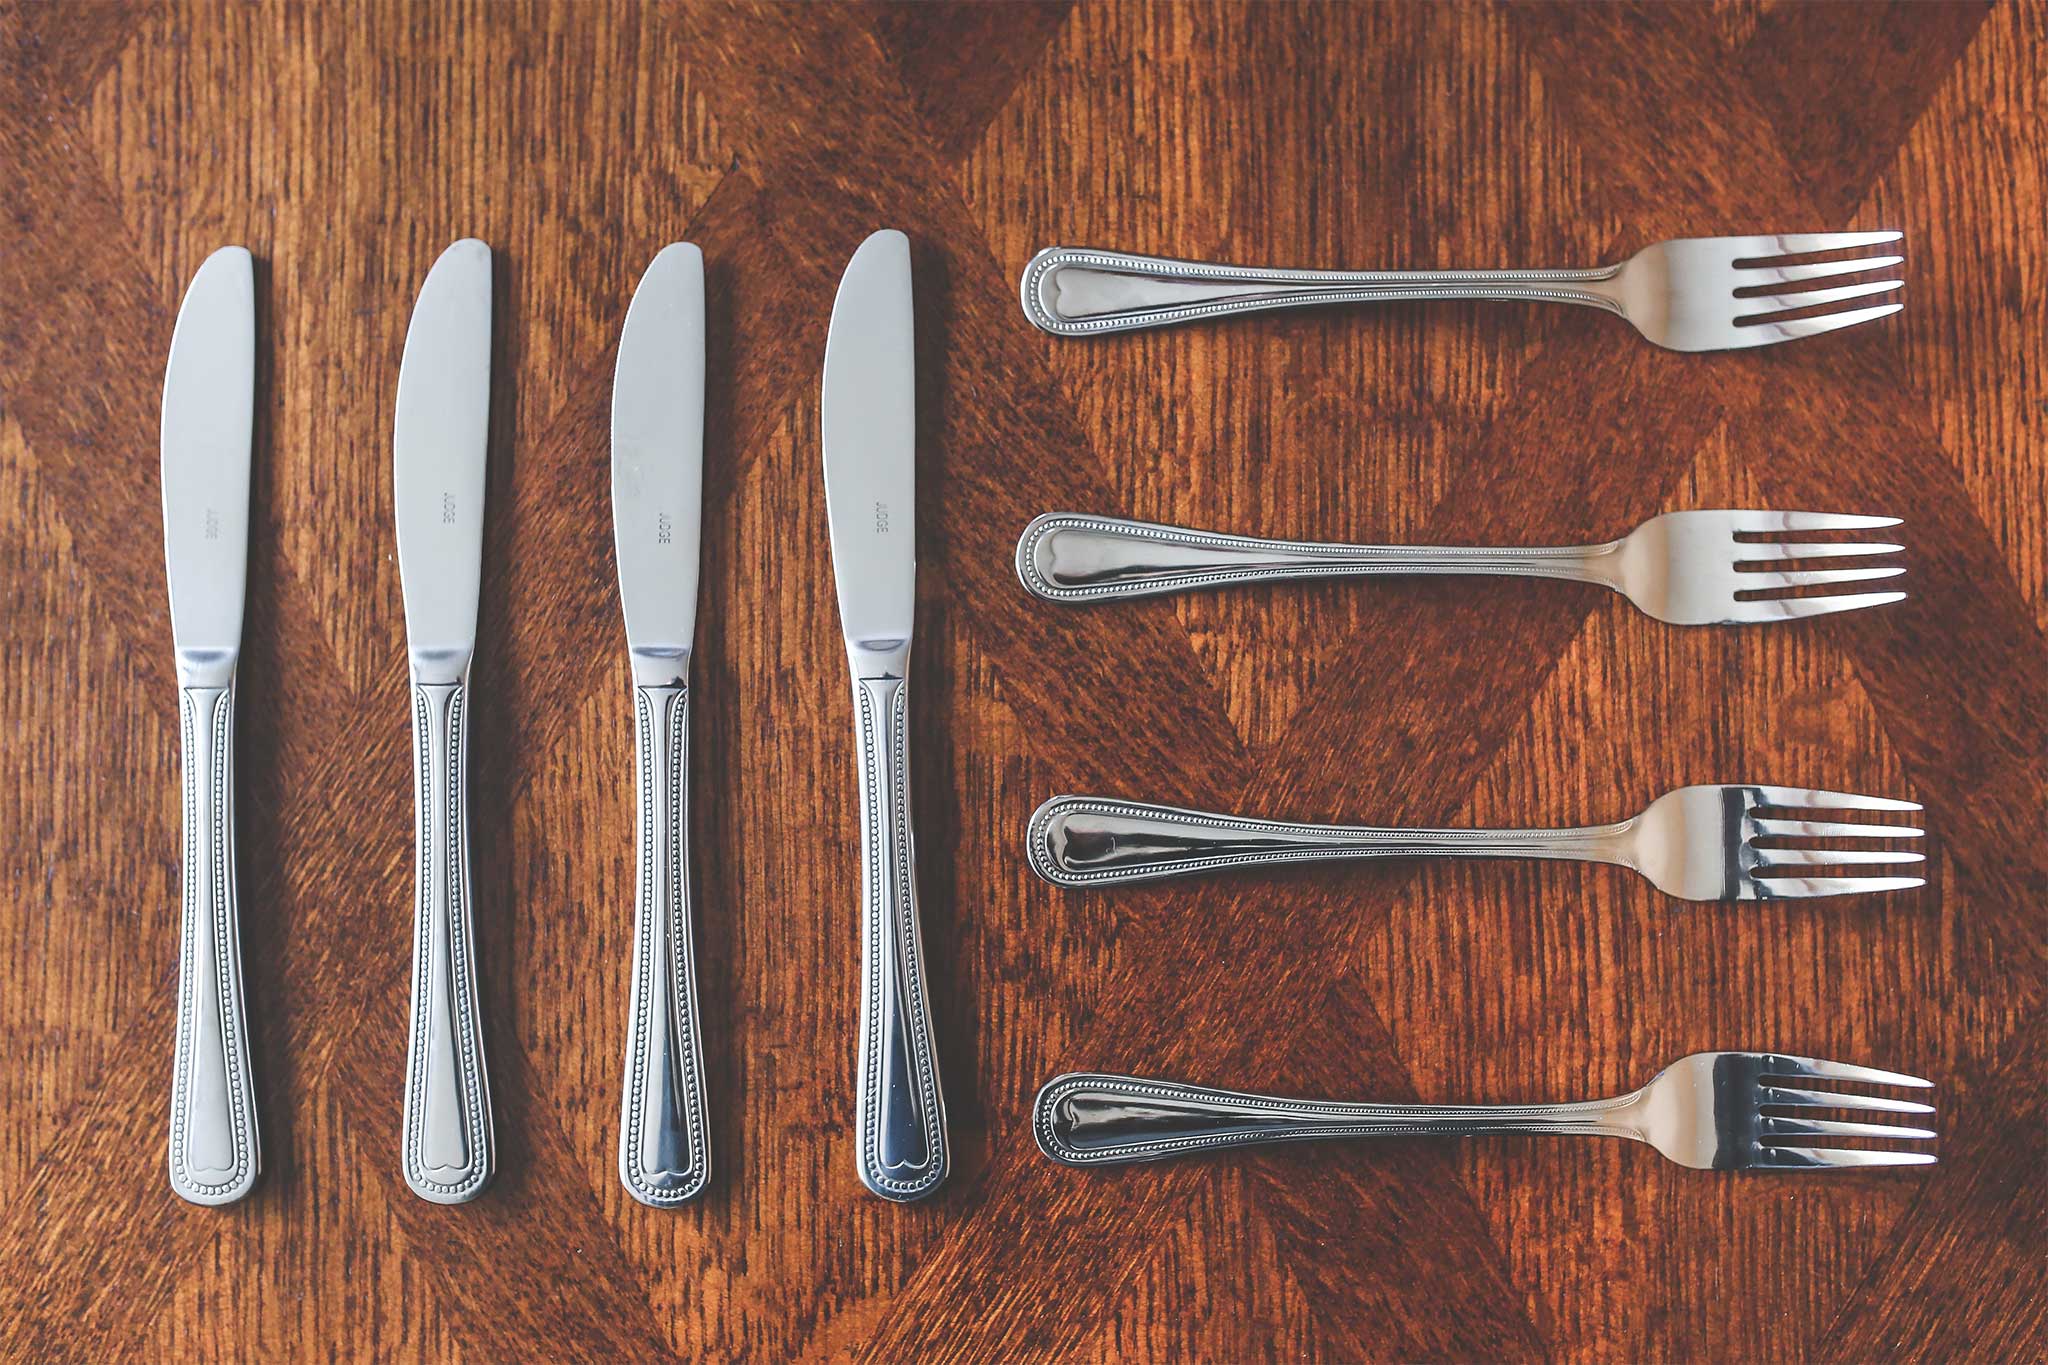 Four butter knives and four forks laid out on a wooden countertop